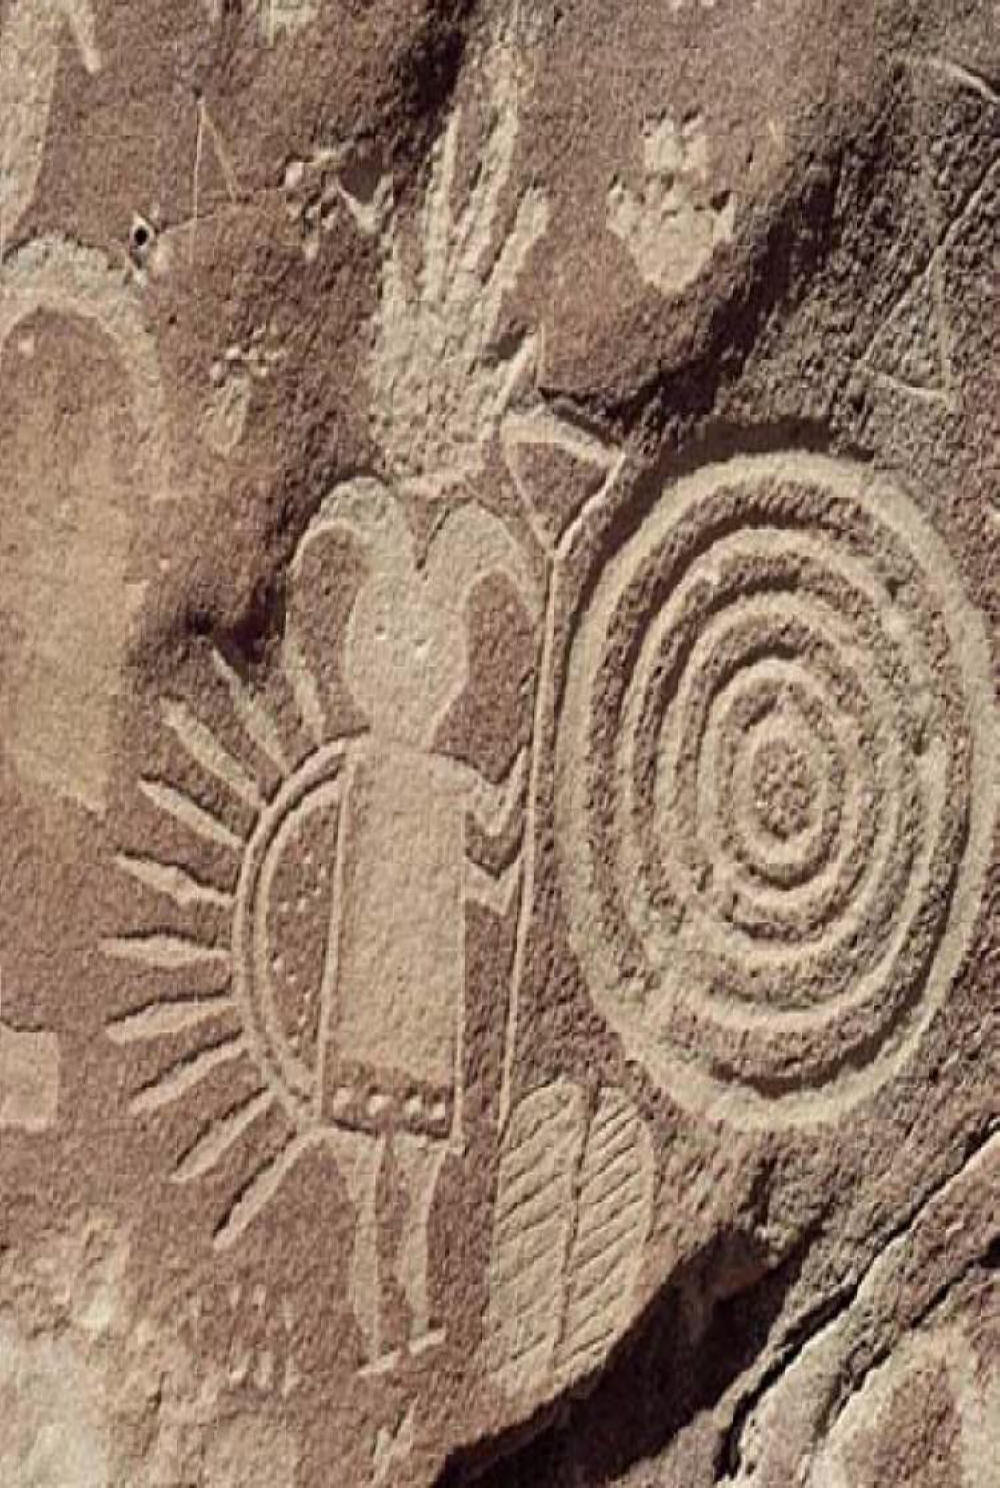 The Devil and spirals seem to go hand in hand in many ancient petroglyphs.